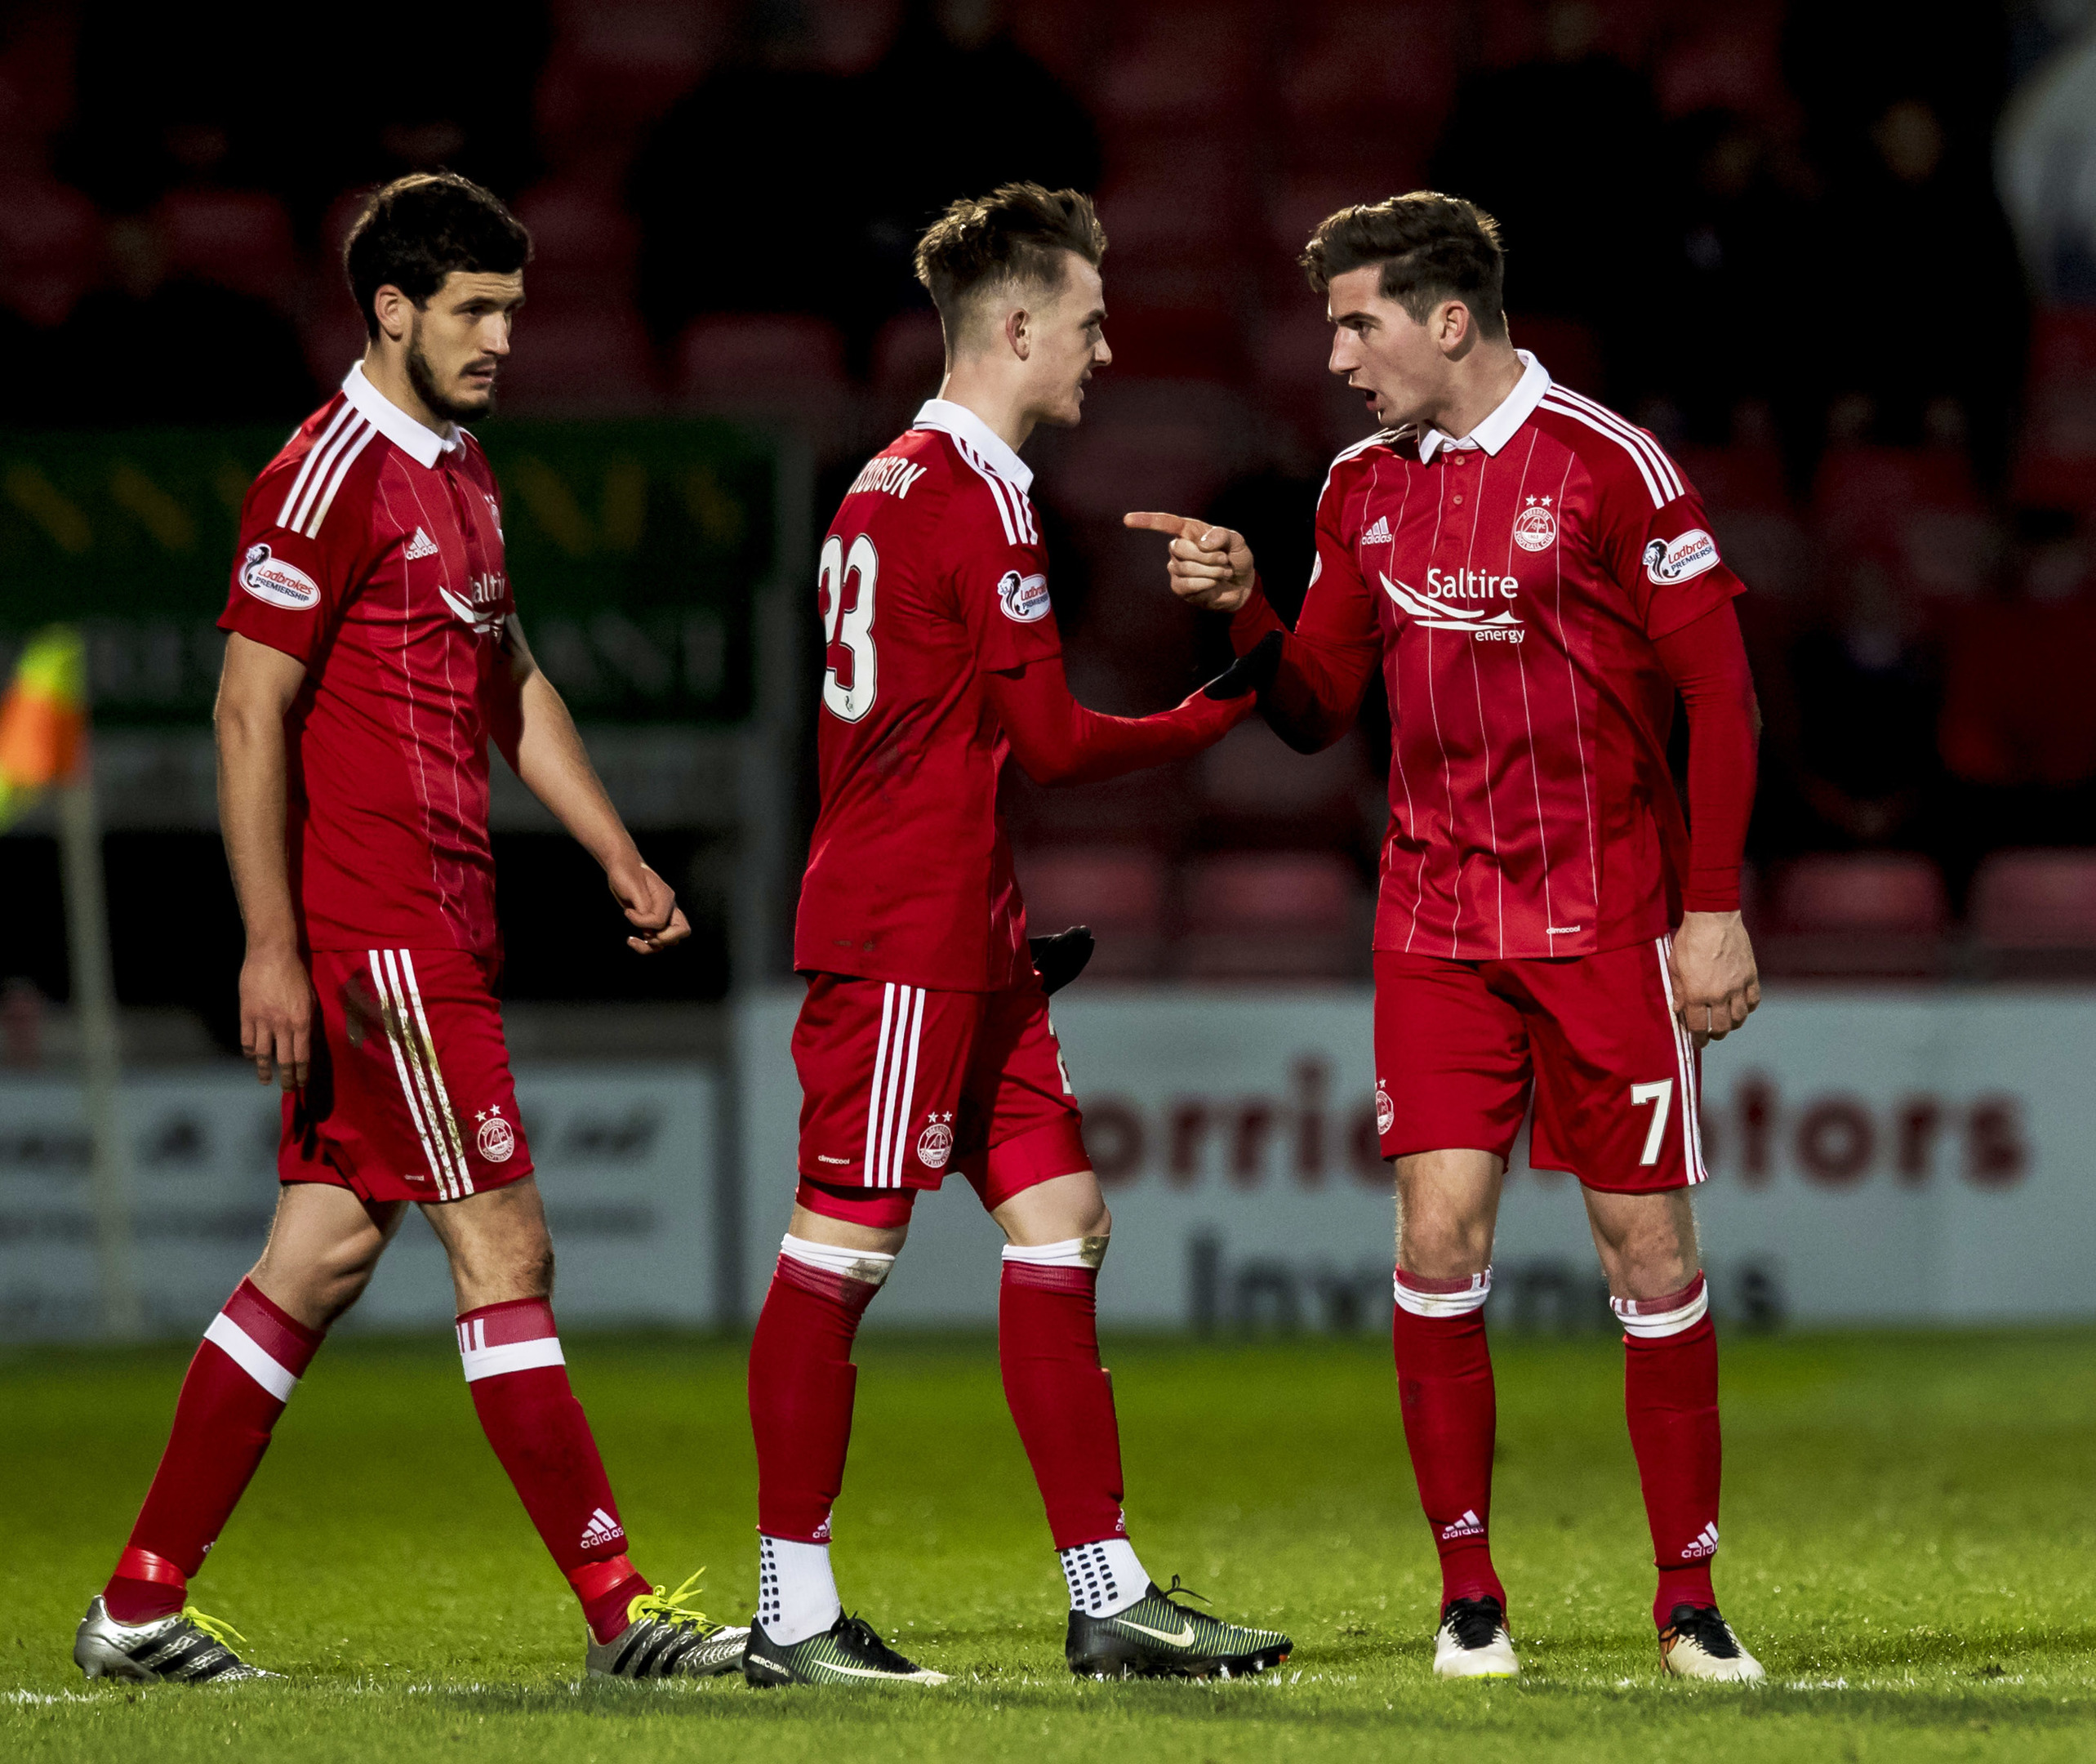 Kenny McLean and James Maddison will be team-mates again next season at Norwich City.